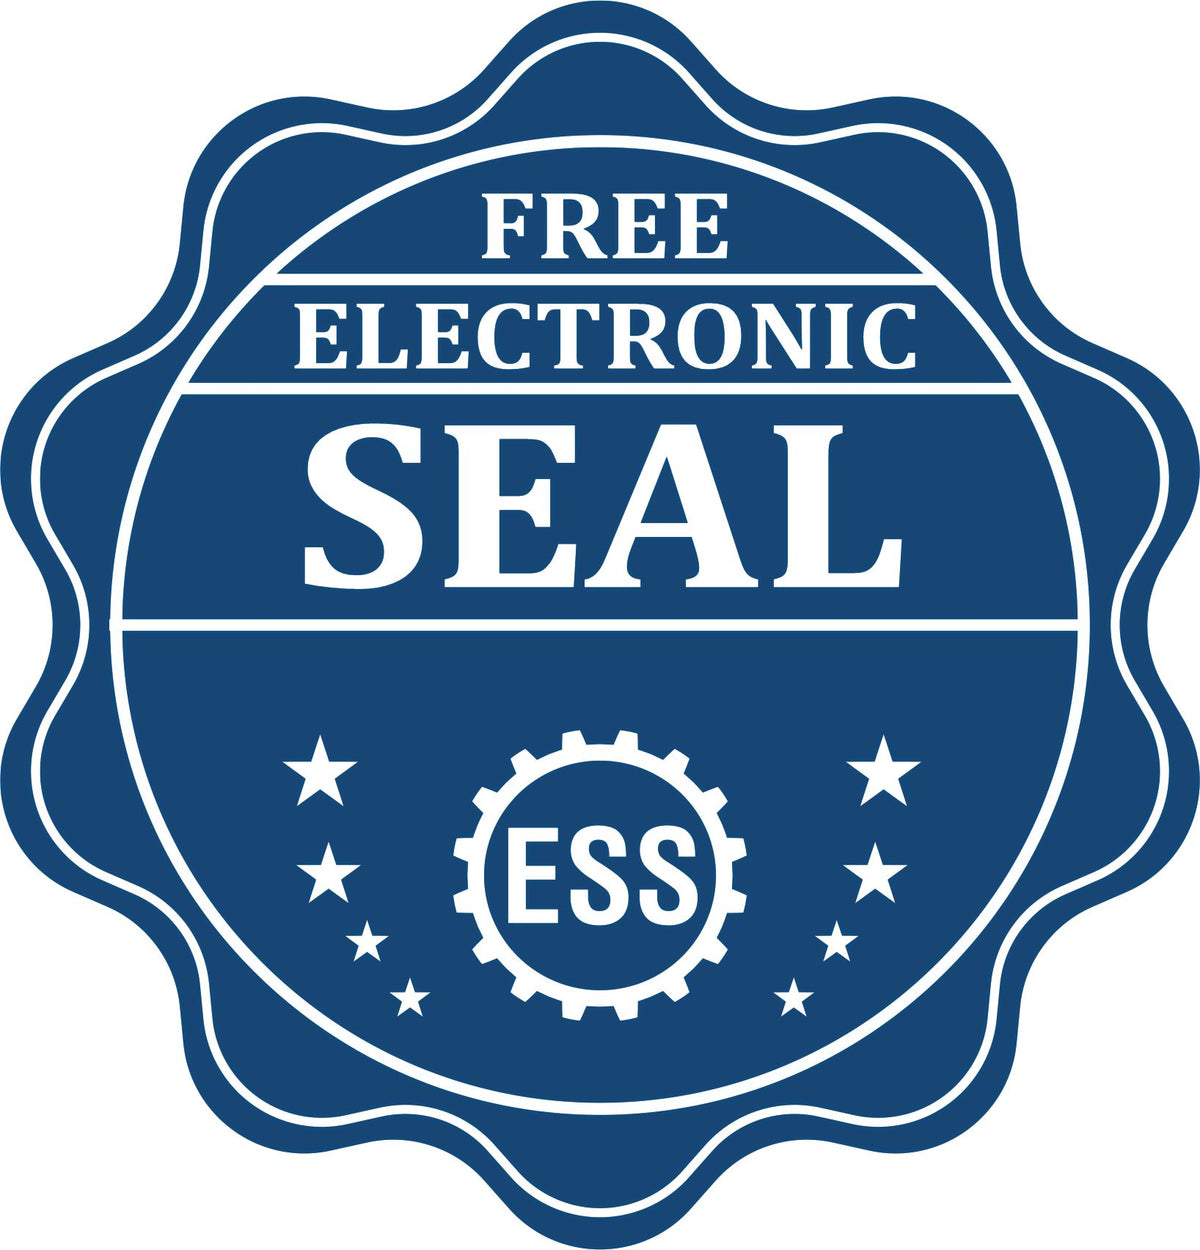 A badge showing a free electronic seal for the Rhode Island Desk Architect Embossing Seal with stars and the ESS gear on the emblem.